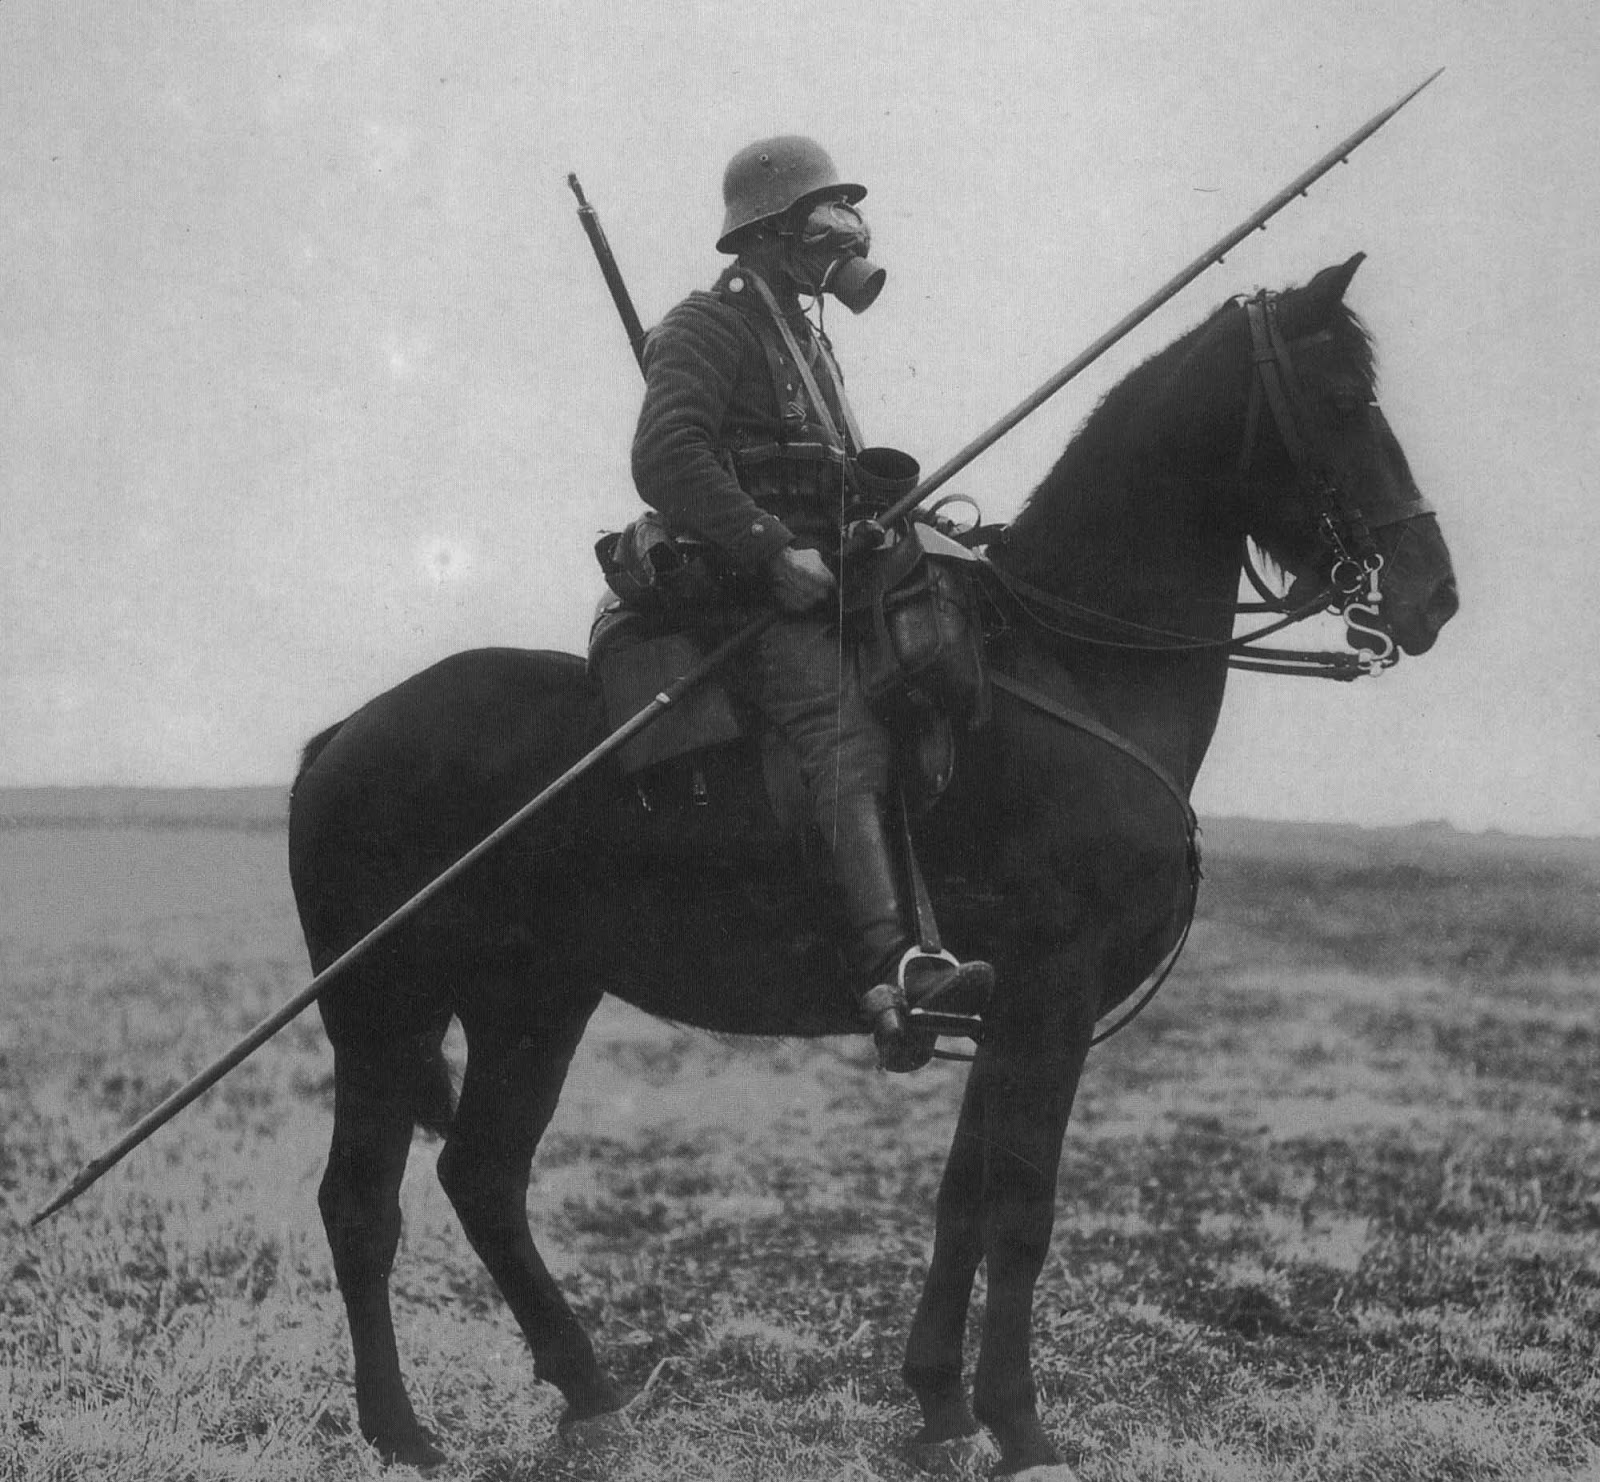 German cavalry patrol in gas masks and carrying lances, 1918 - Rare  Historical Photos